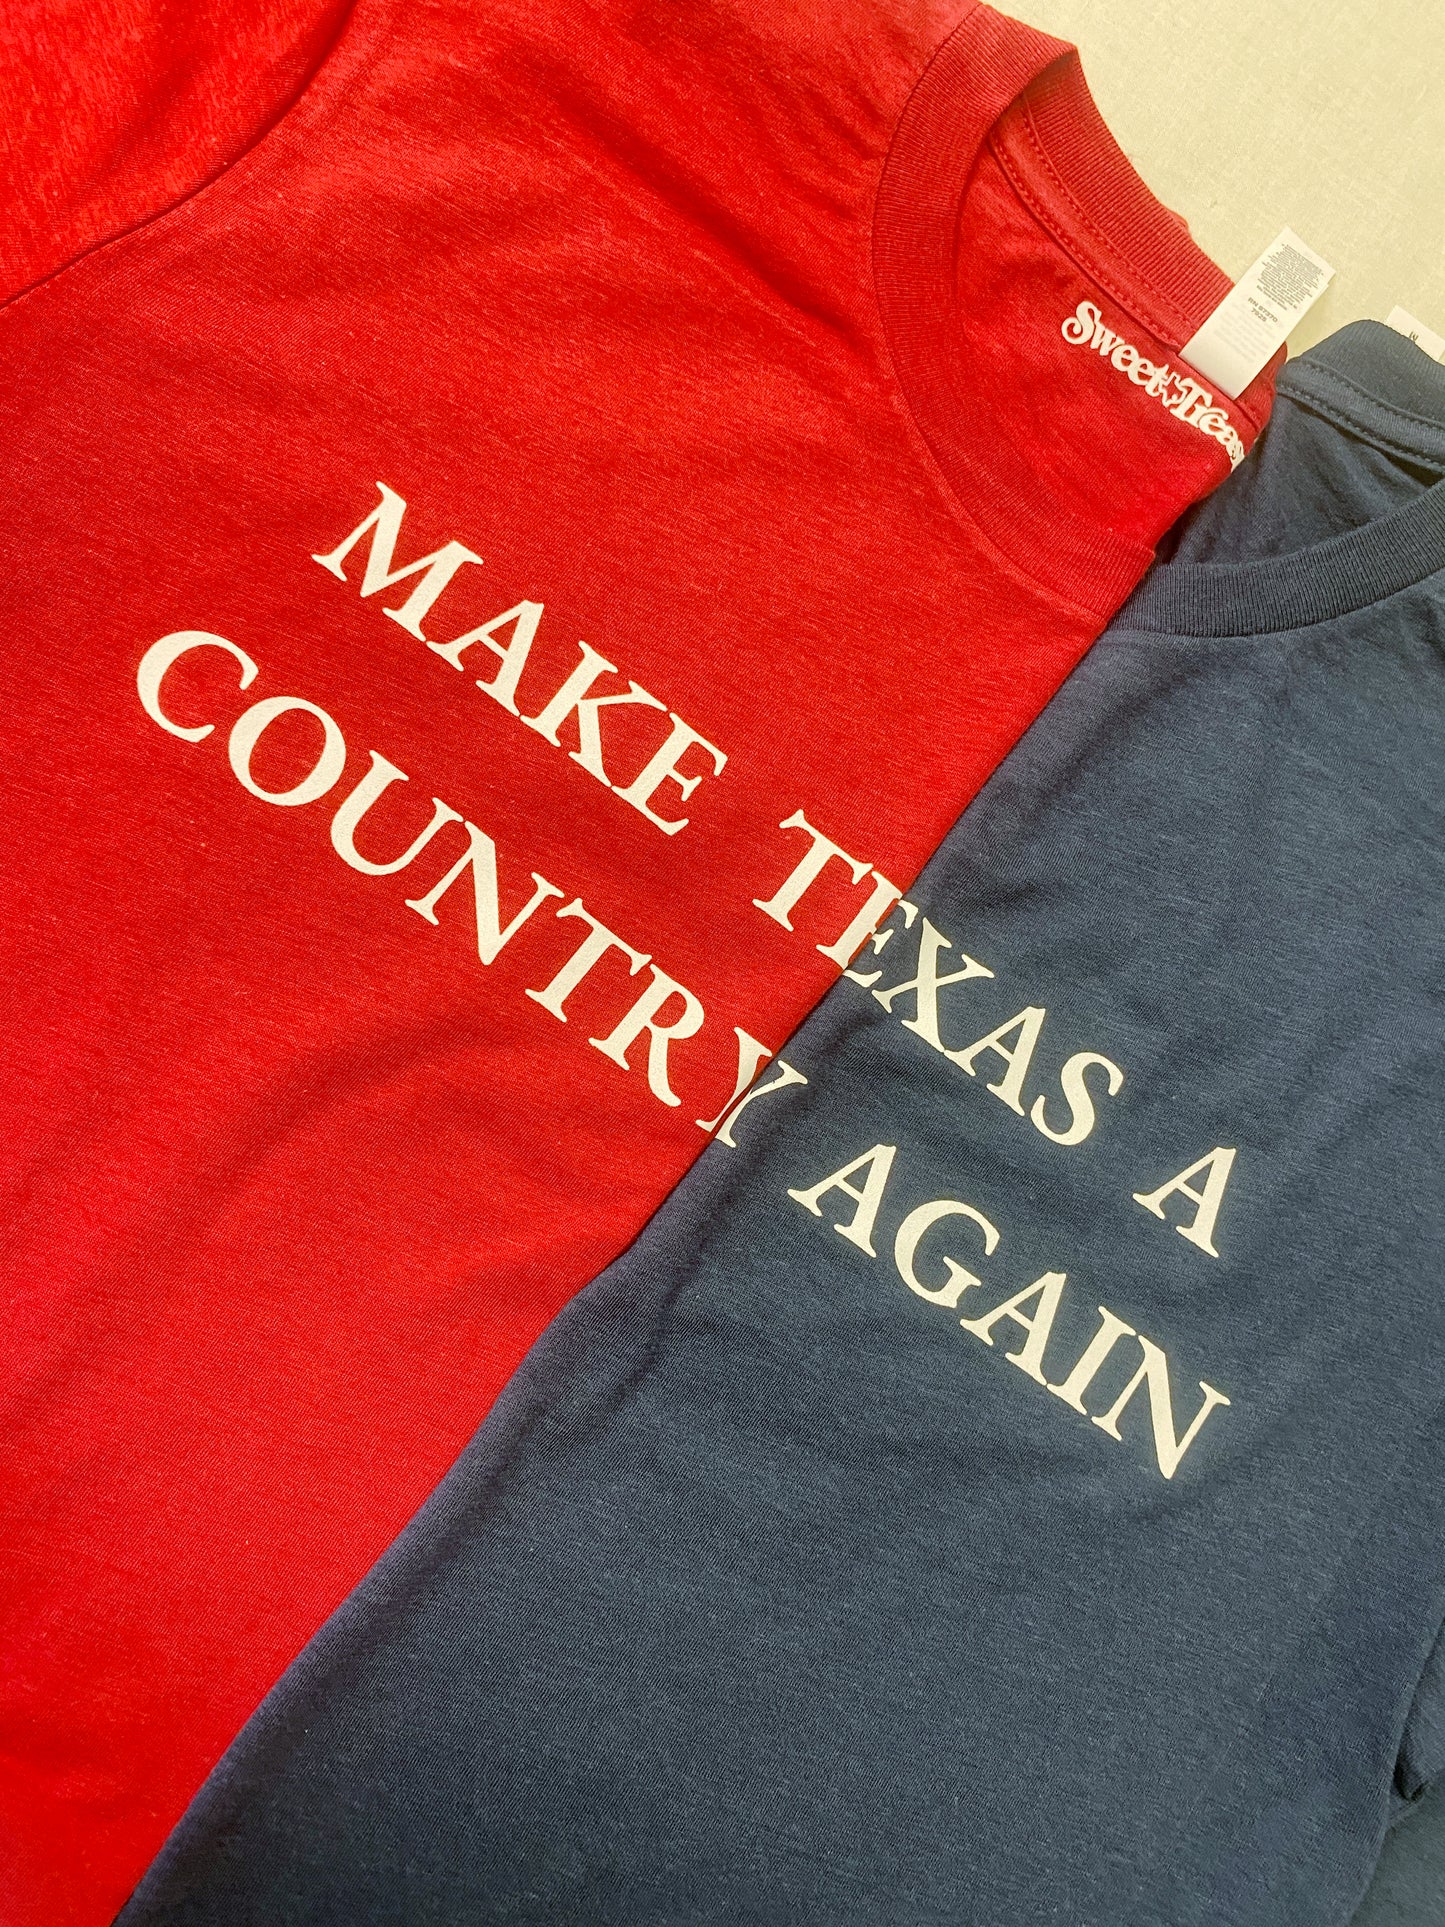 Make Texas a Country Tee [2 Colors]